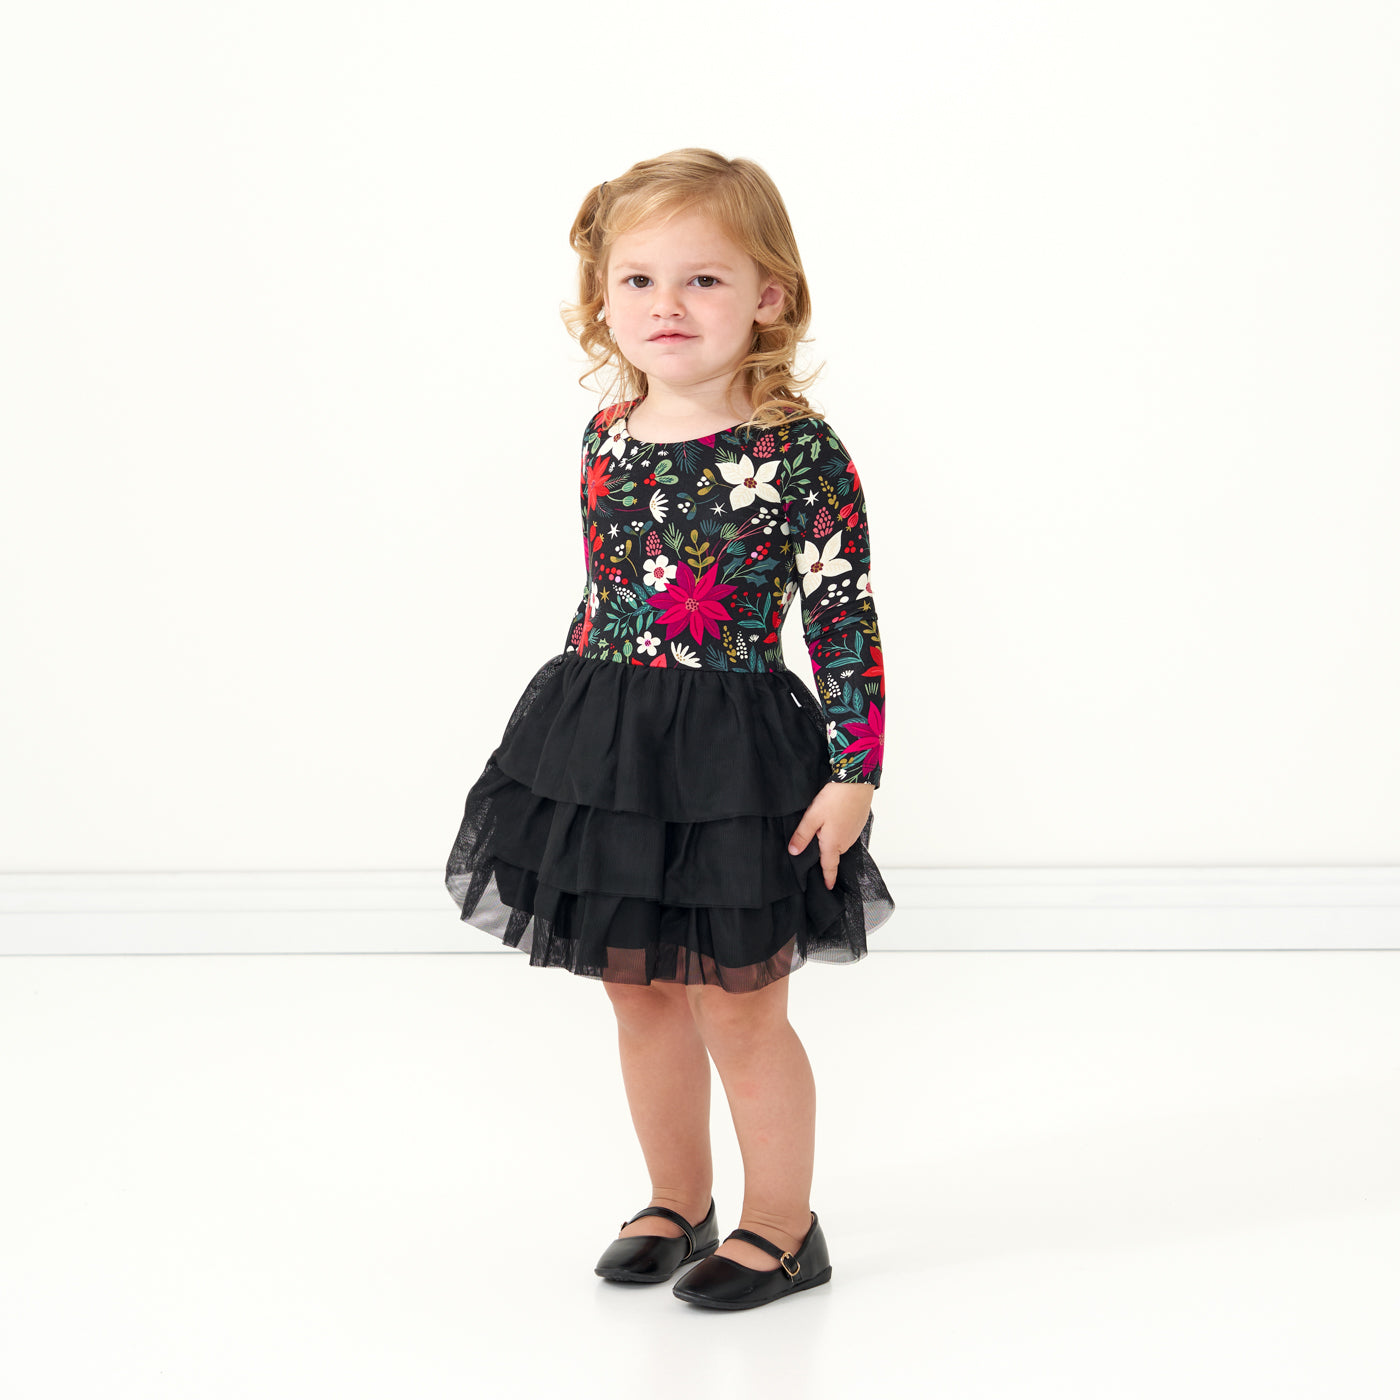 Child wearing a Berry Merry Flutter Tutu Dress with Bloomer